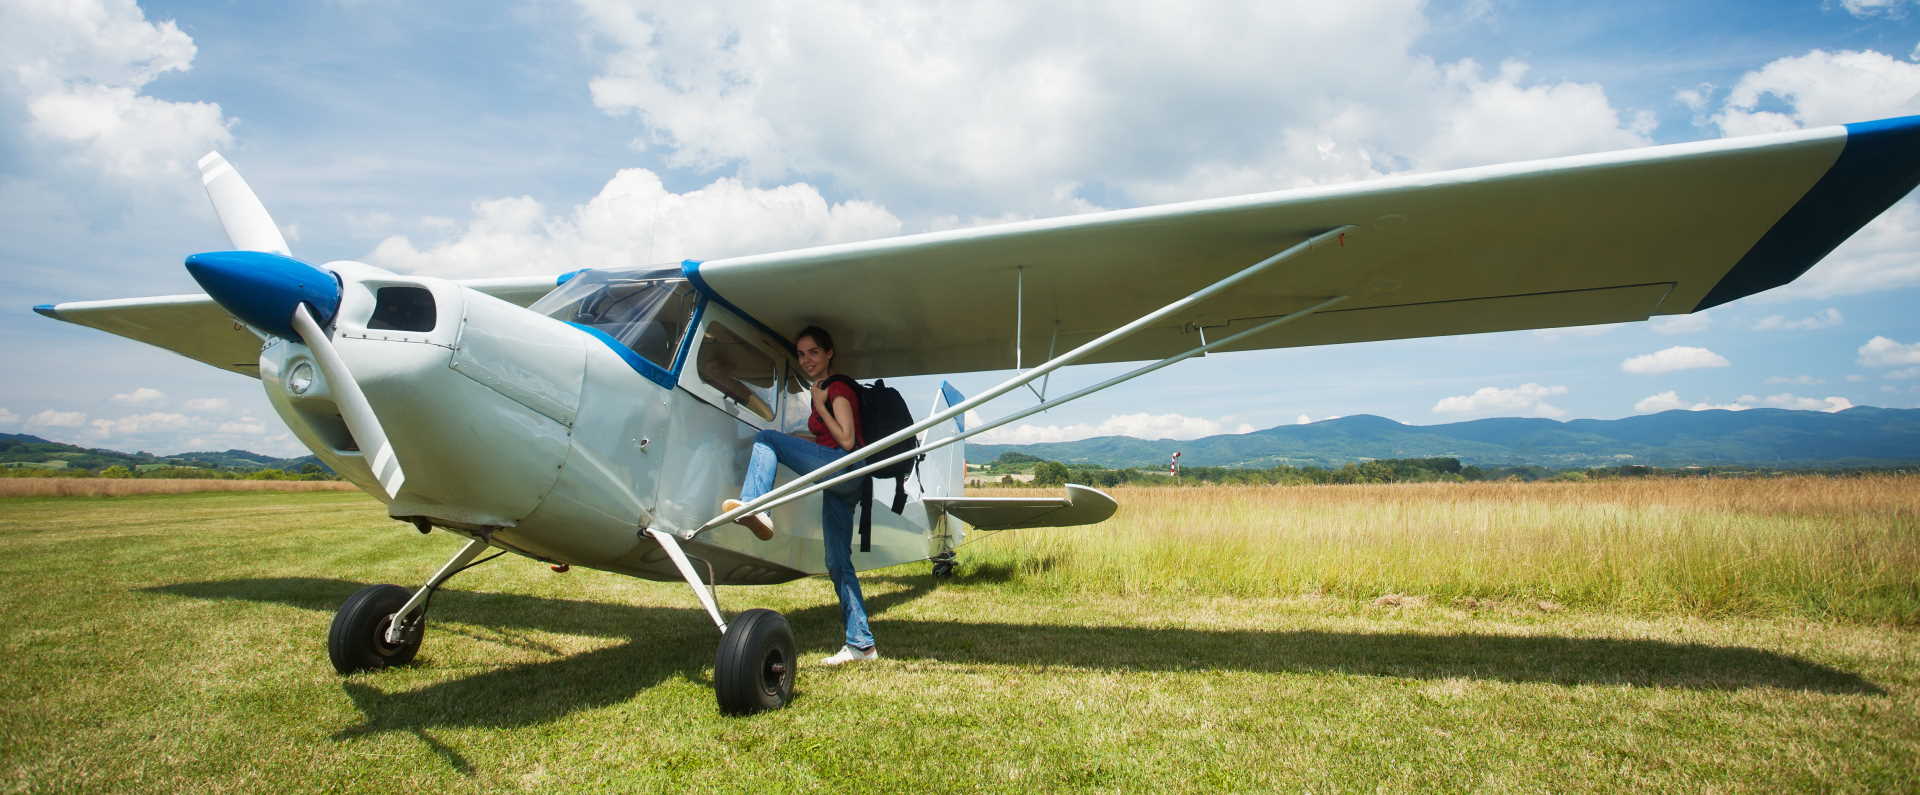 Woman entering small airplane in a grassy field